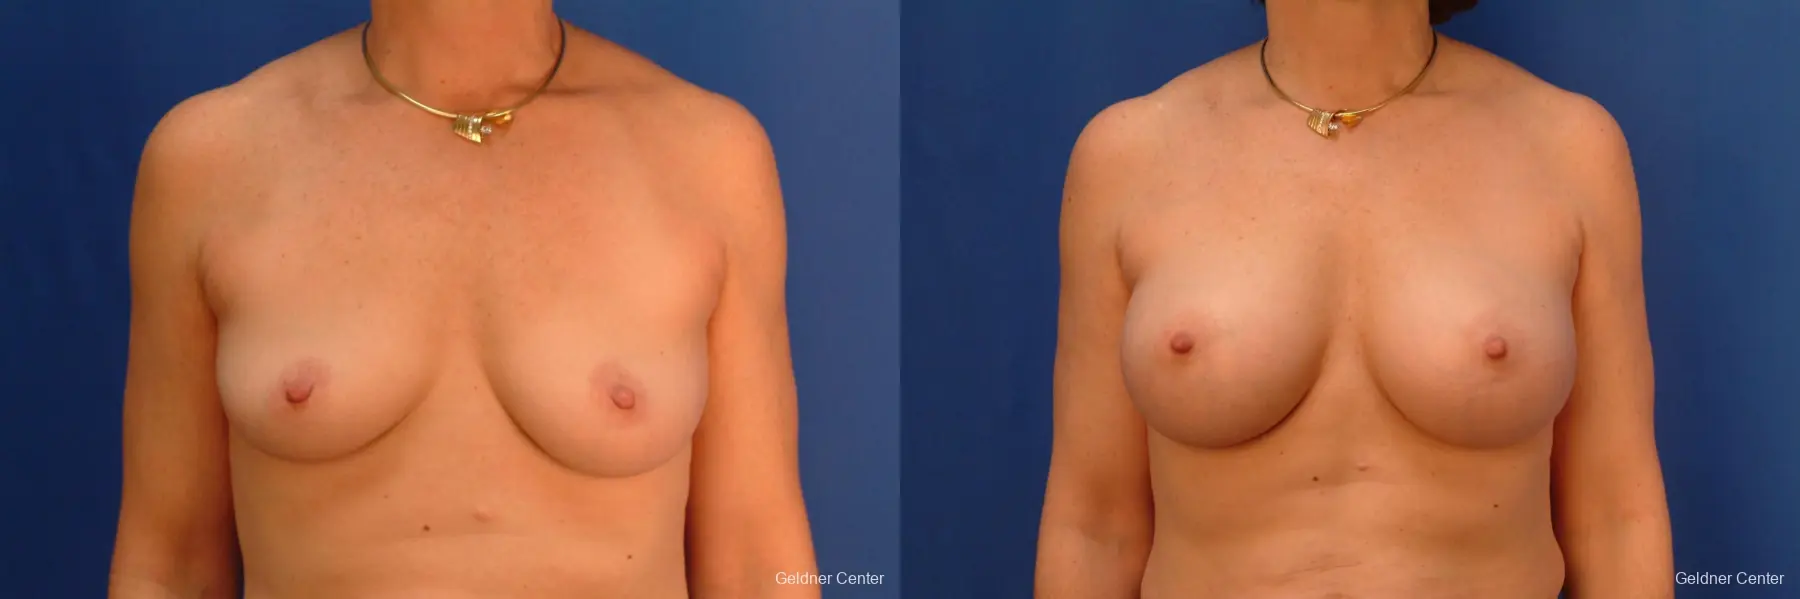 Breast Augmentation Hinsdale, Chicago 2541 - Before and After 1